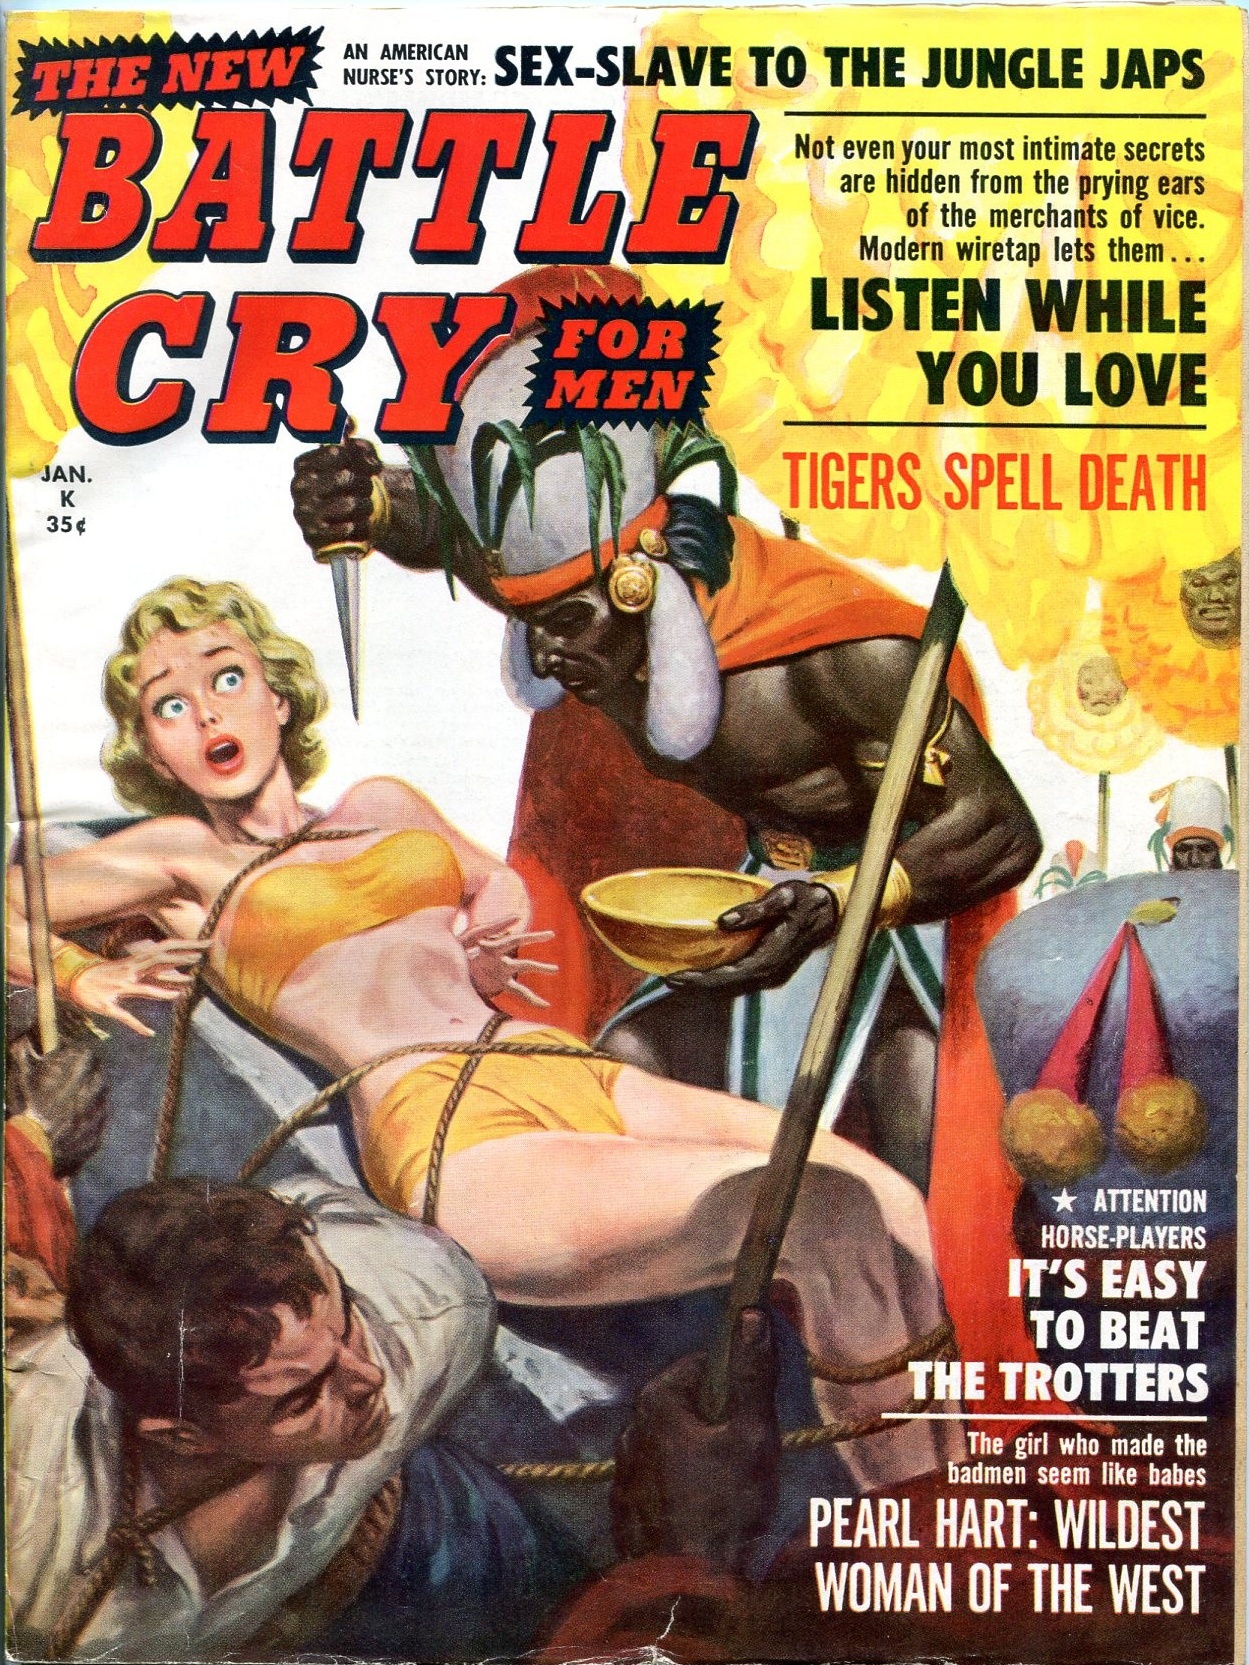 Sex Slave to the Jungle Japs -- Pulp Covers picture pic